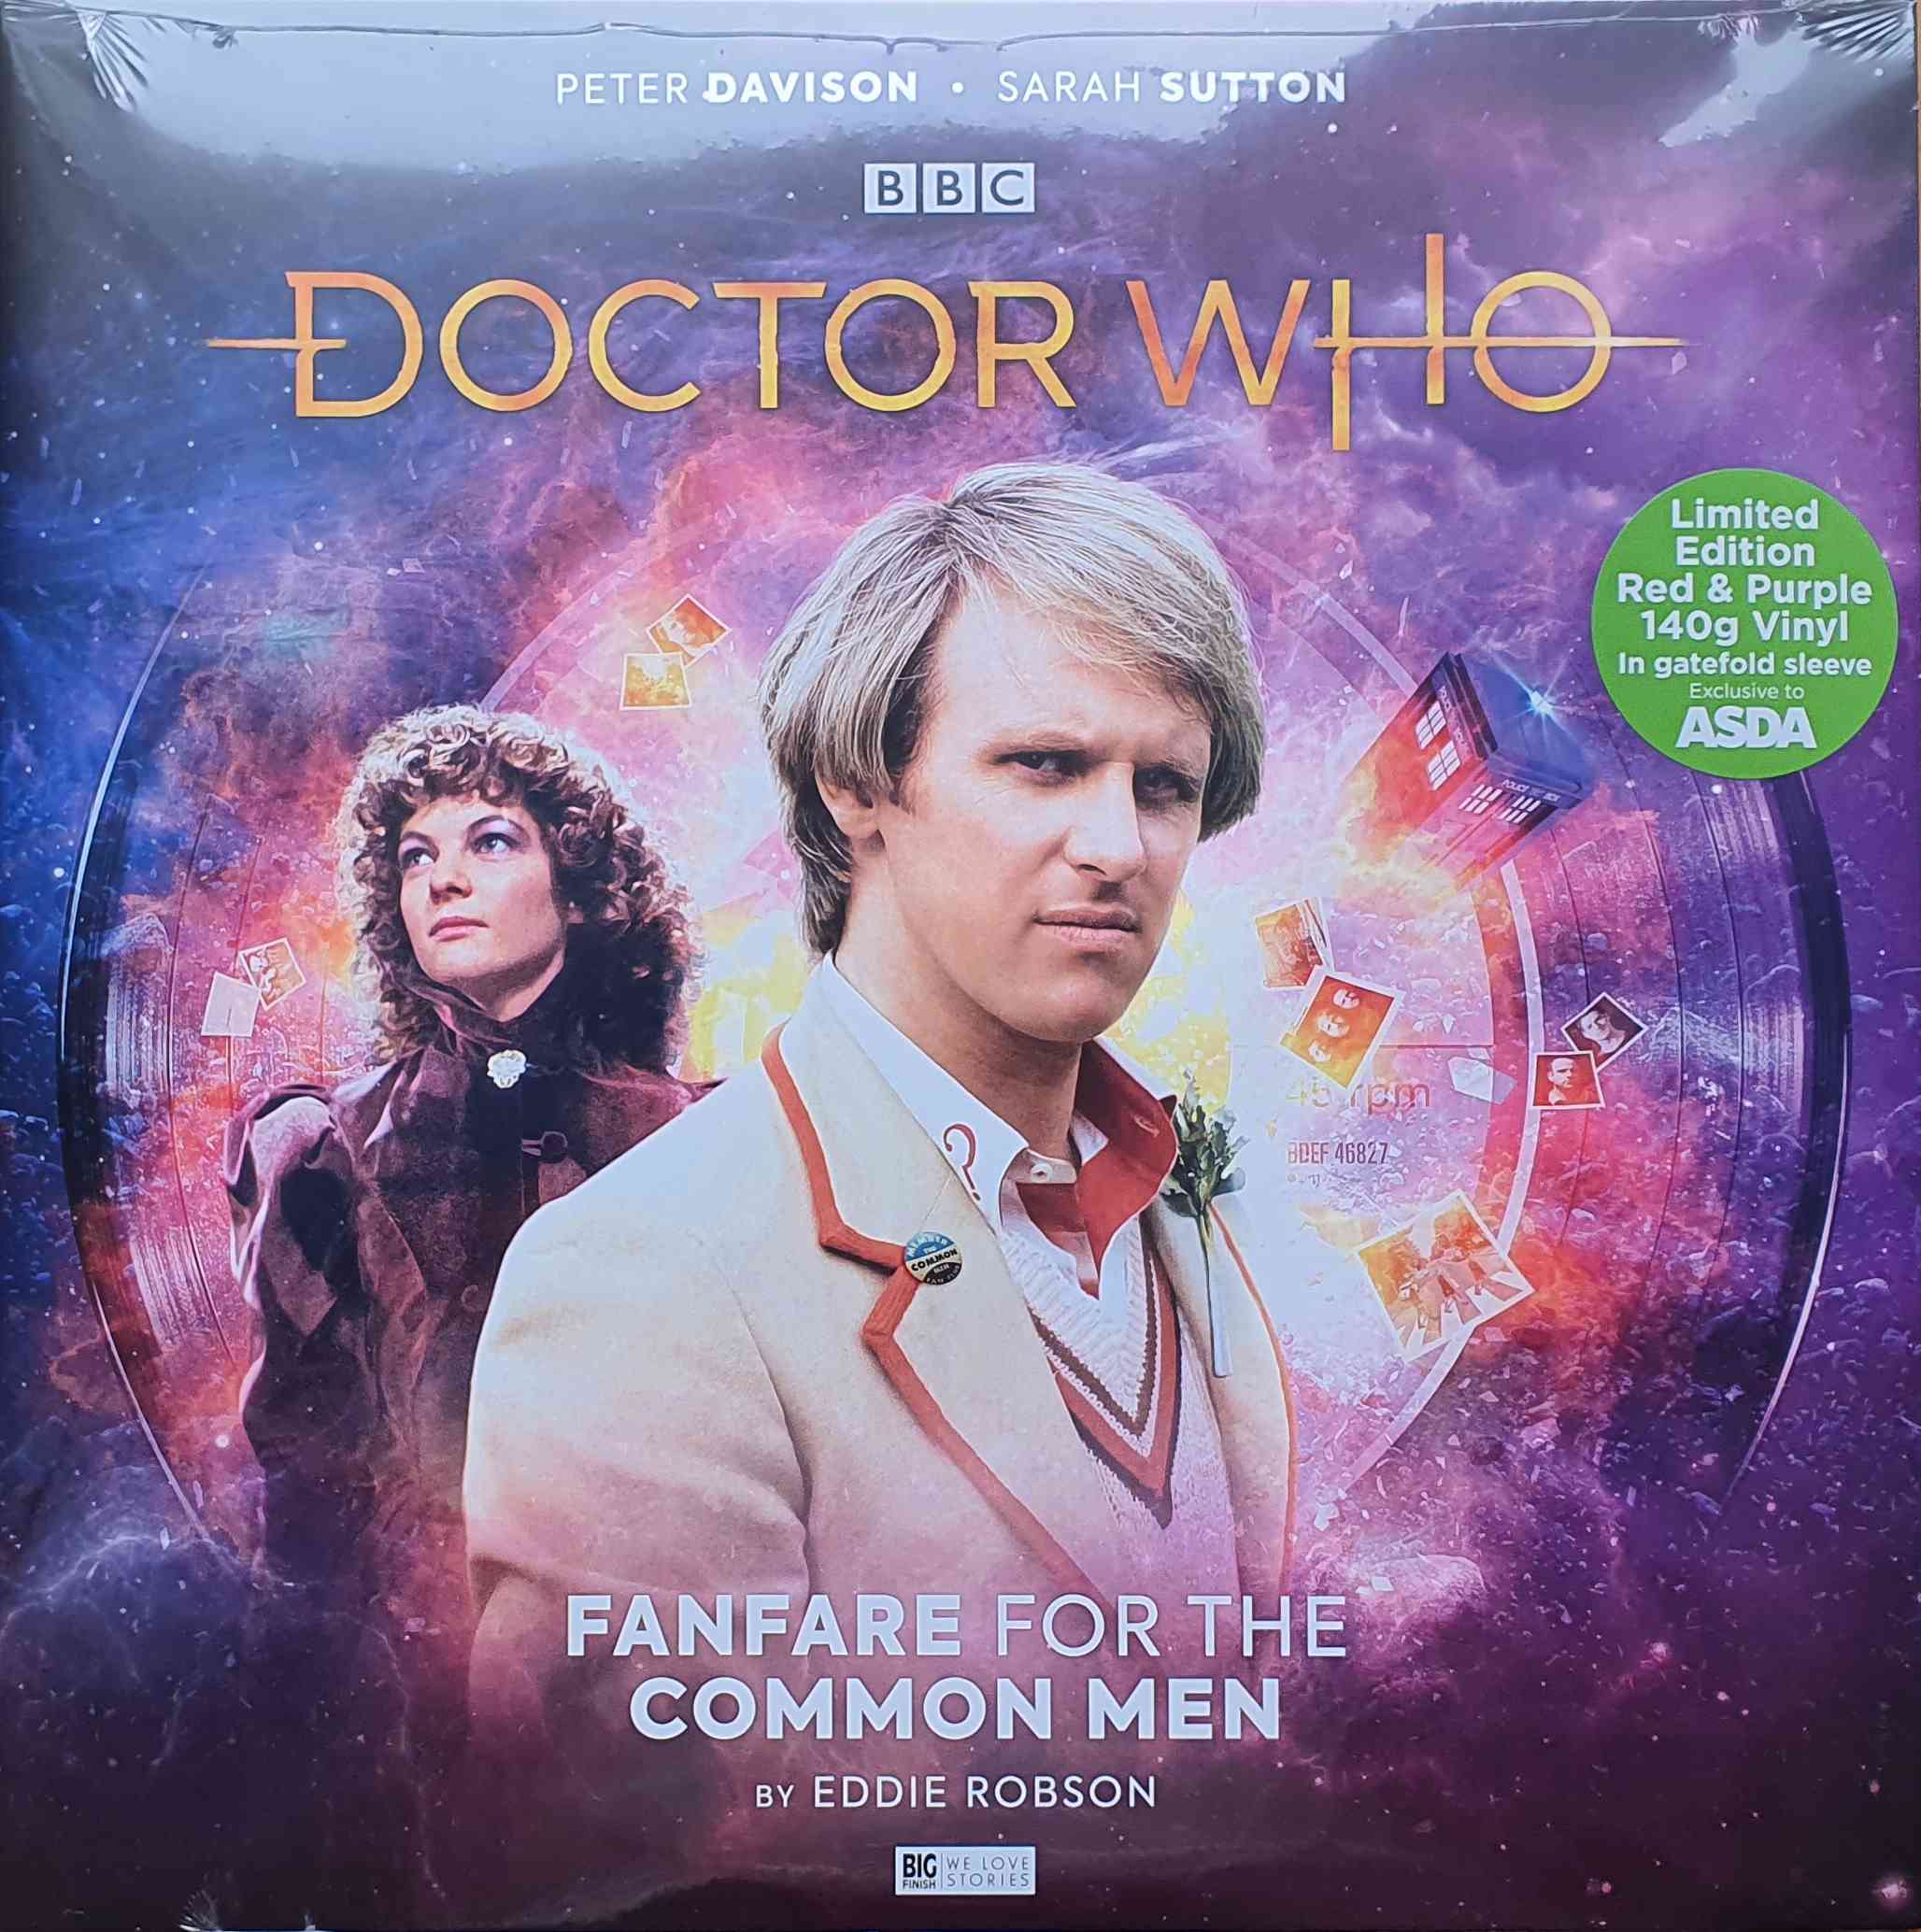 Picture of Doctor Who - Fanfare for the common man by artist Eddie Robson from the BBC albums - Records and Tapes library